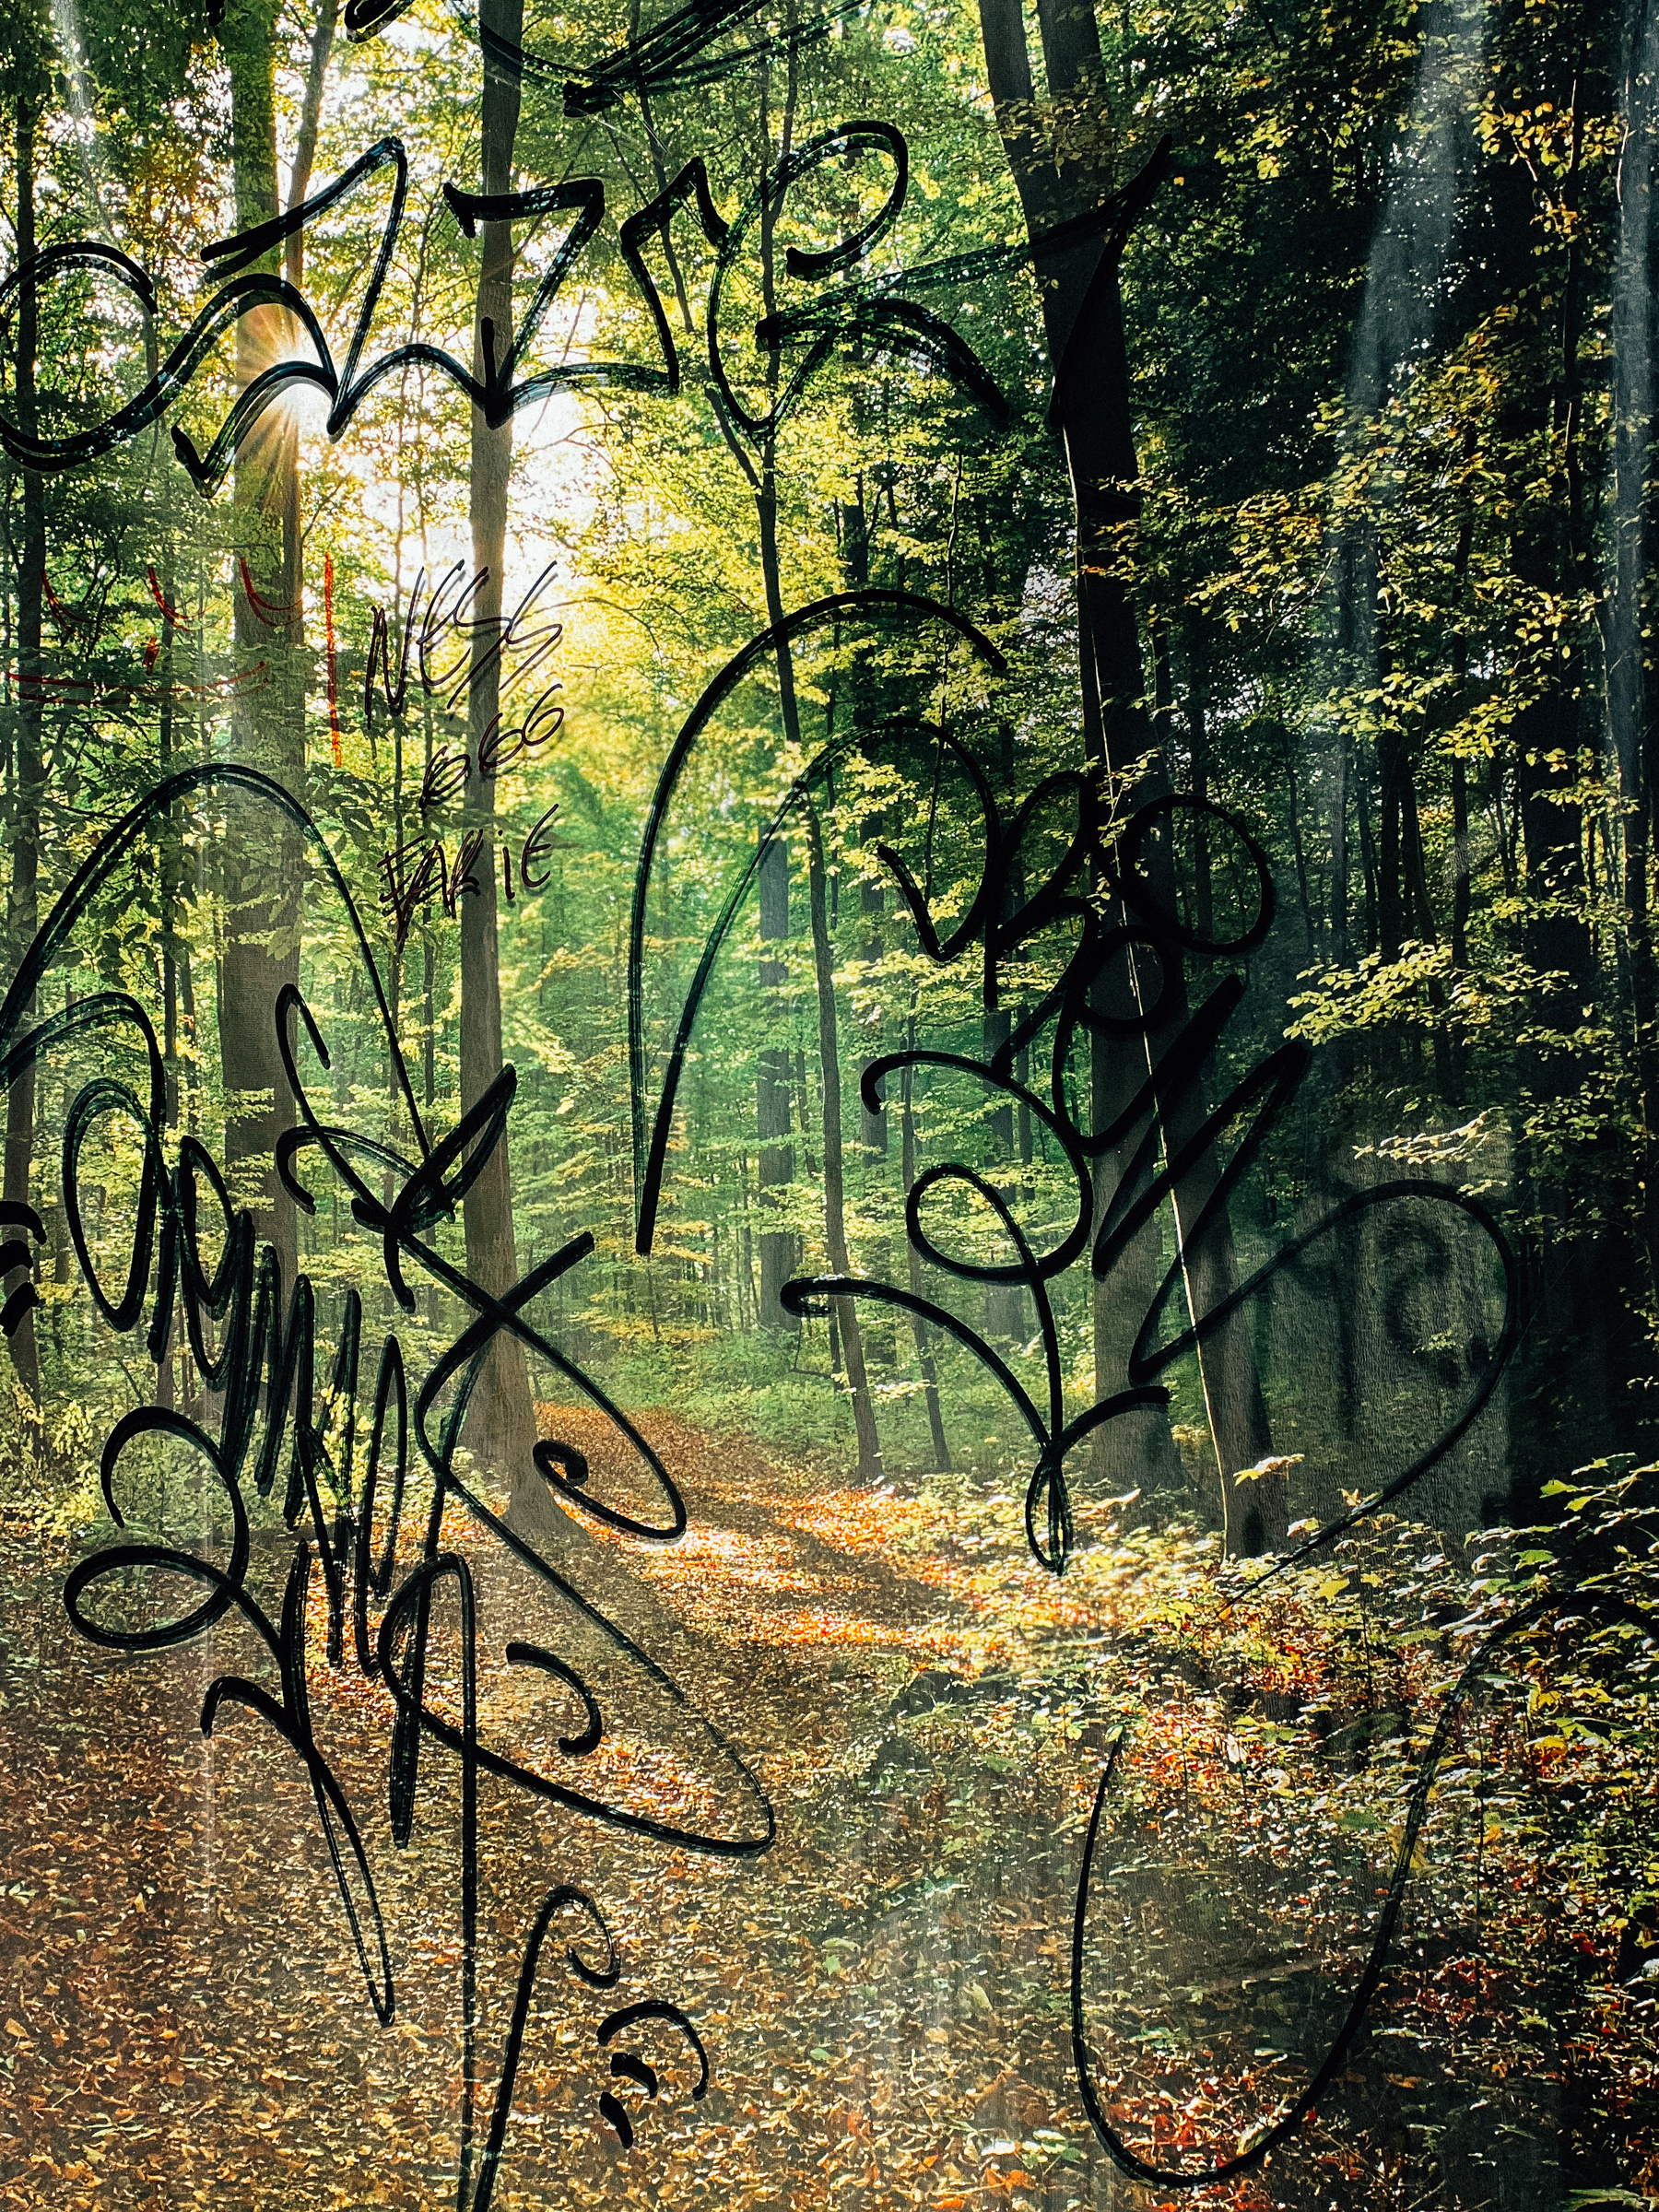 The image shows a forest scene with sunlight filtering through the trees. There are scribbles or graffiti-like marks superimposed on the image, obscuring parts of the forest view. Leaves on the ground suggest autumn.